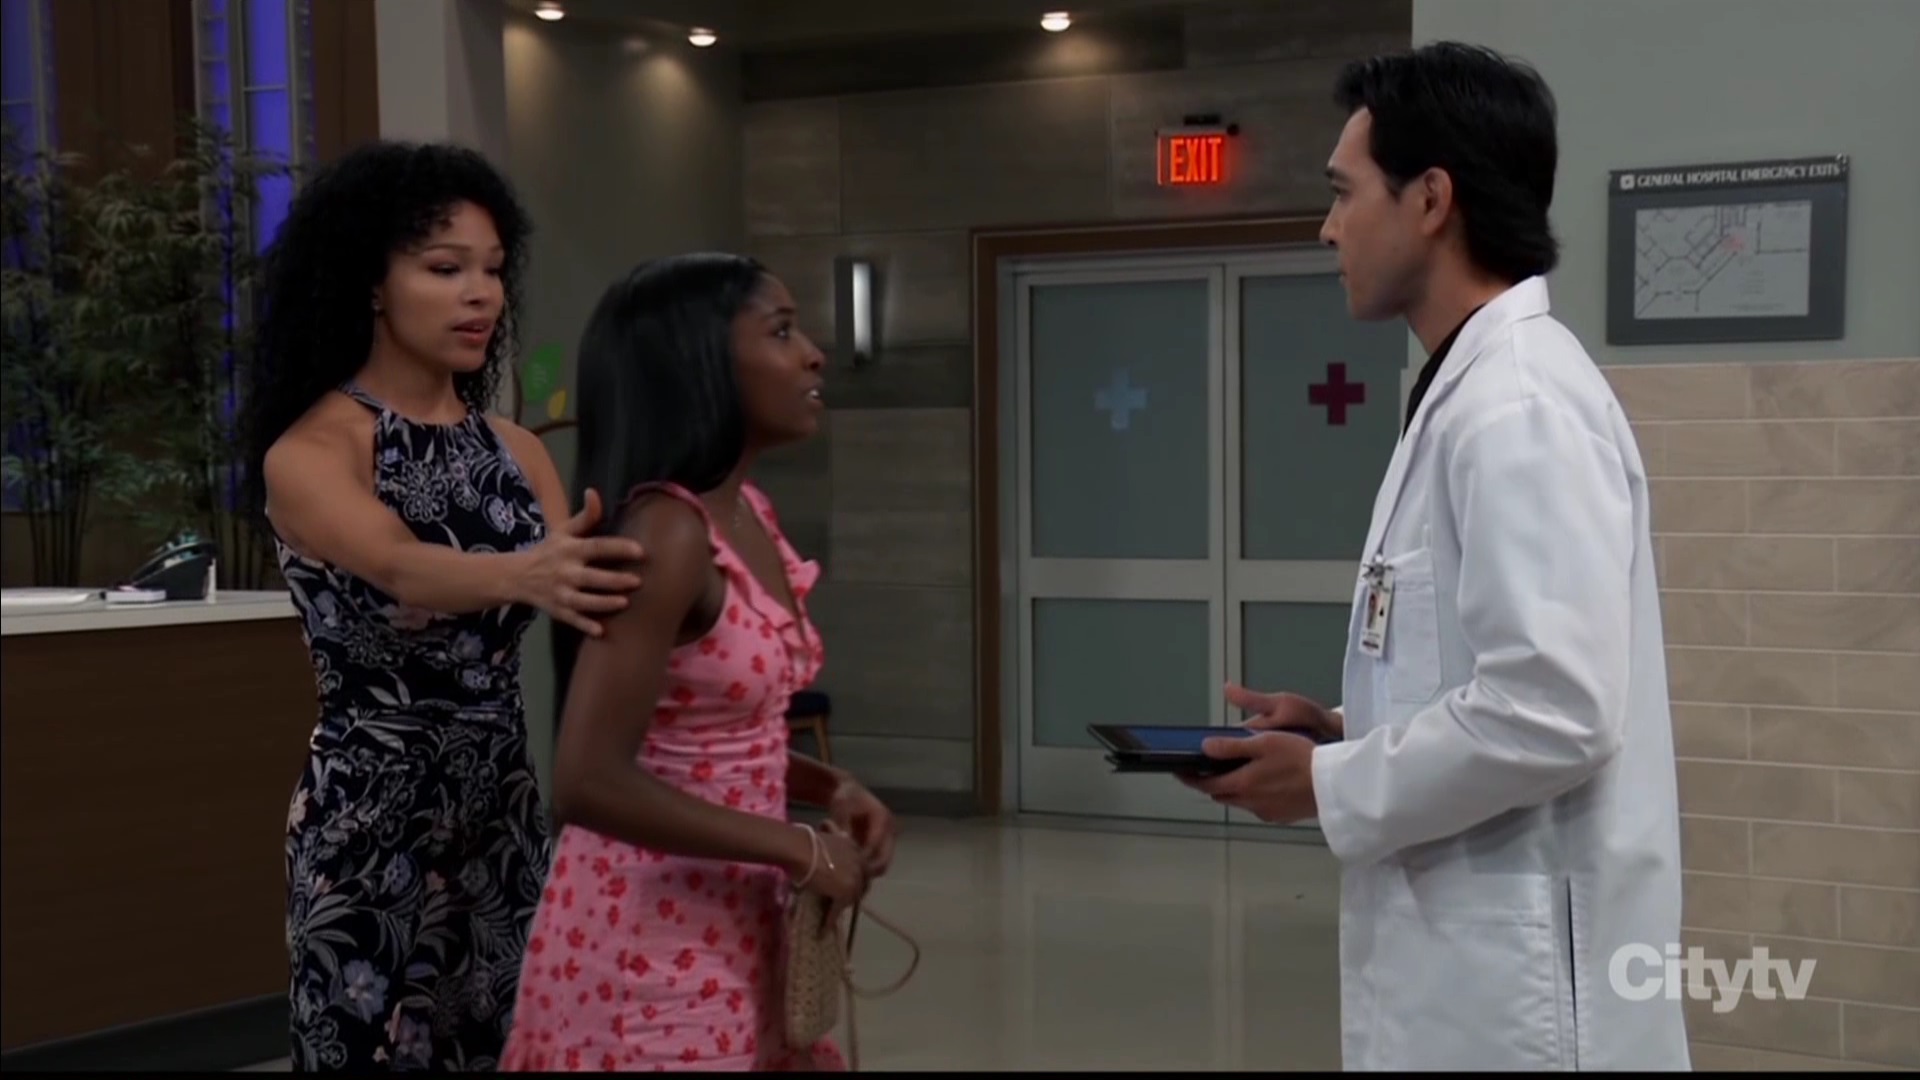 trina worries to the doctor about curtis' surgery